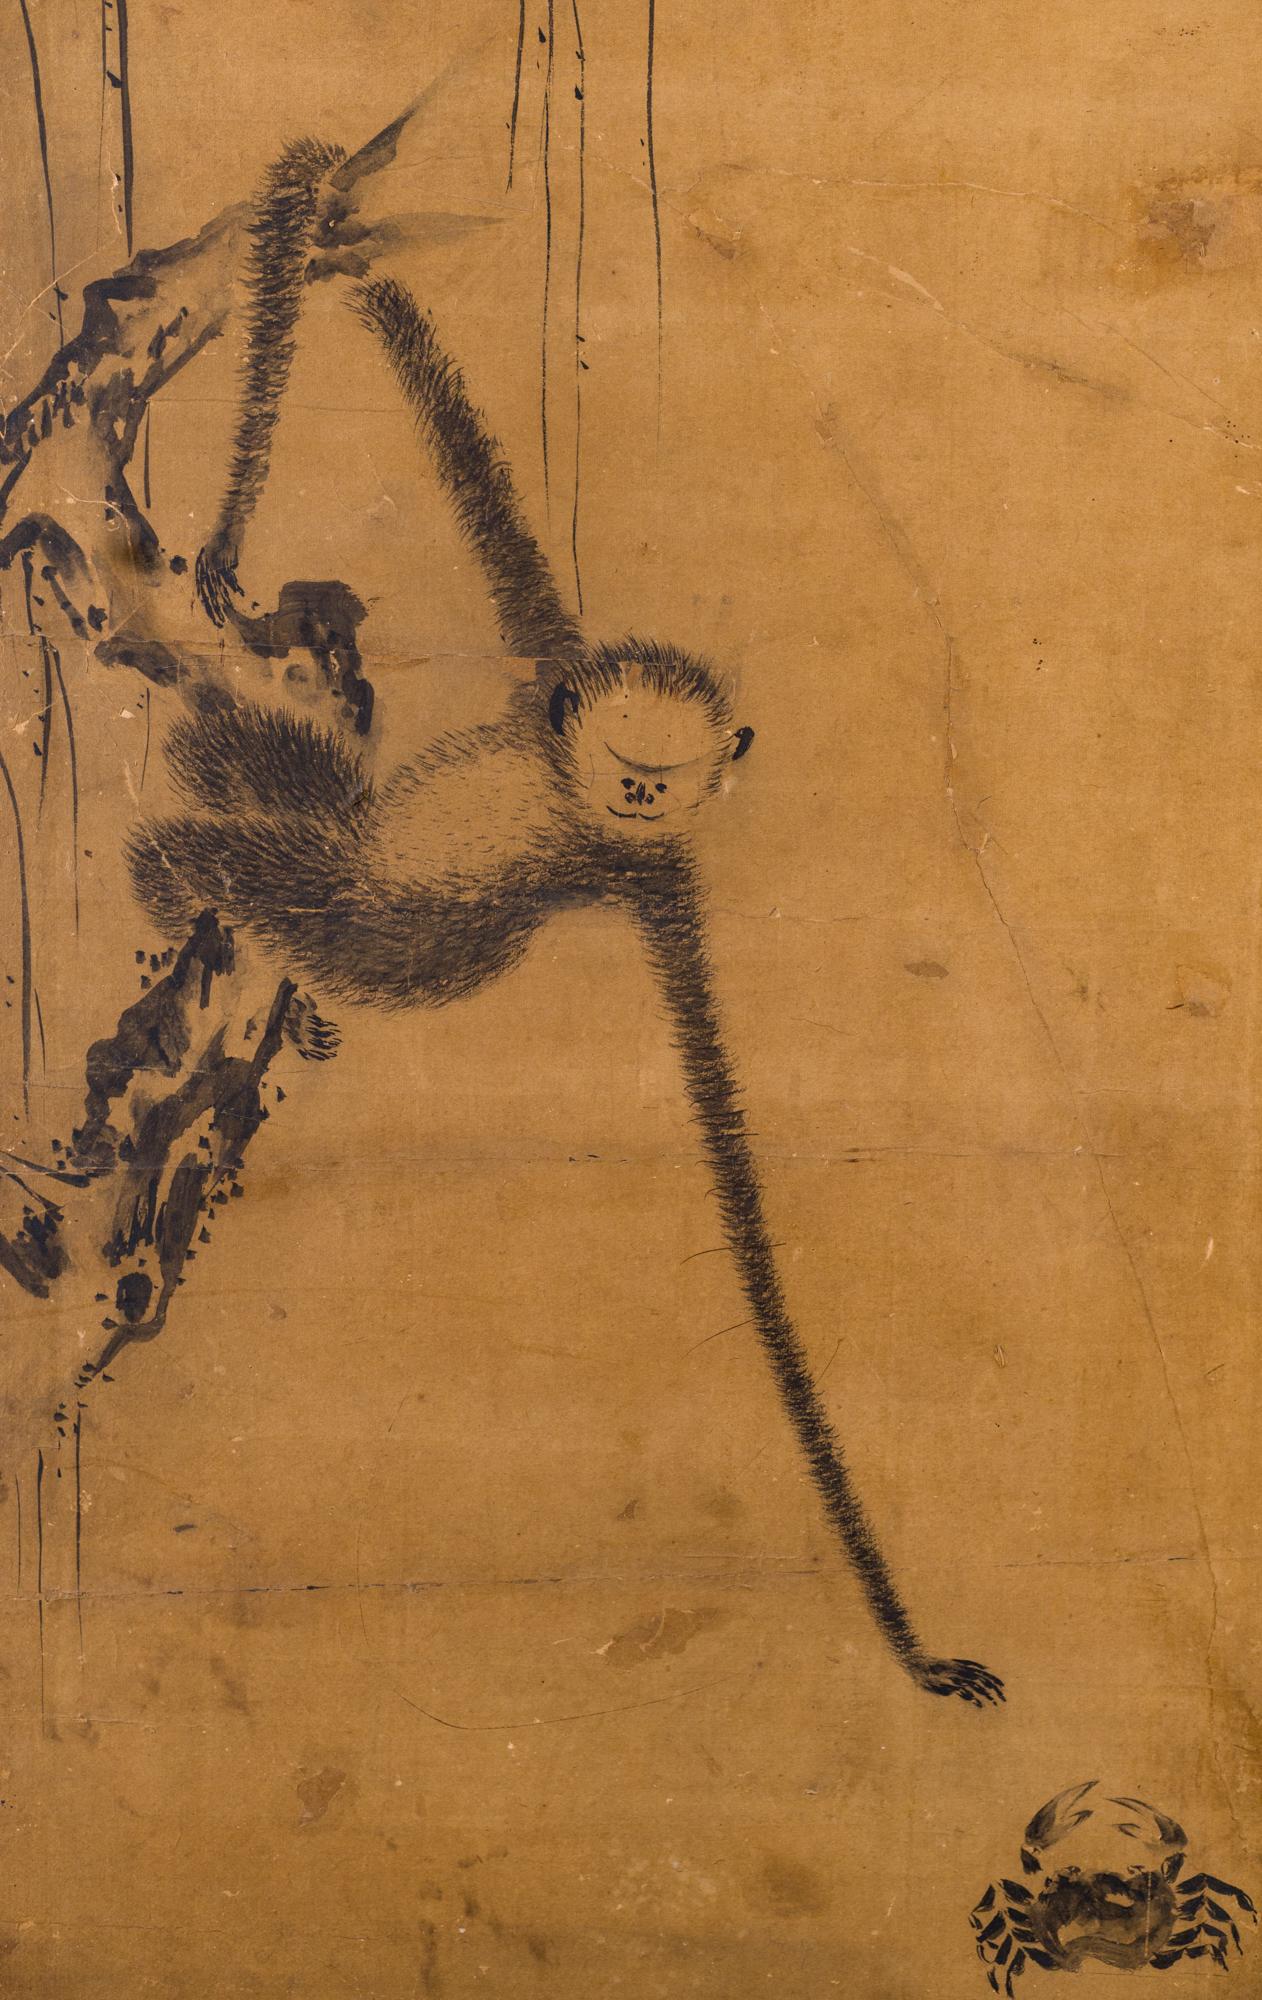 Japanese two-panel screen: Gibbons of Folklore, Edo period (17th century) Kano School painting of gibbons in Japanese fables. The left panel represents a Japanese fable of a monkey and a crab warning against the dangers of deceit. On the right is a